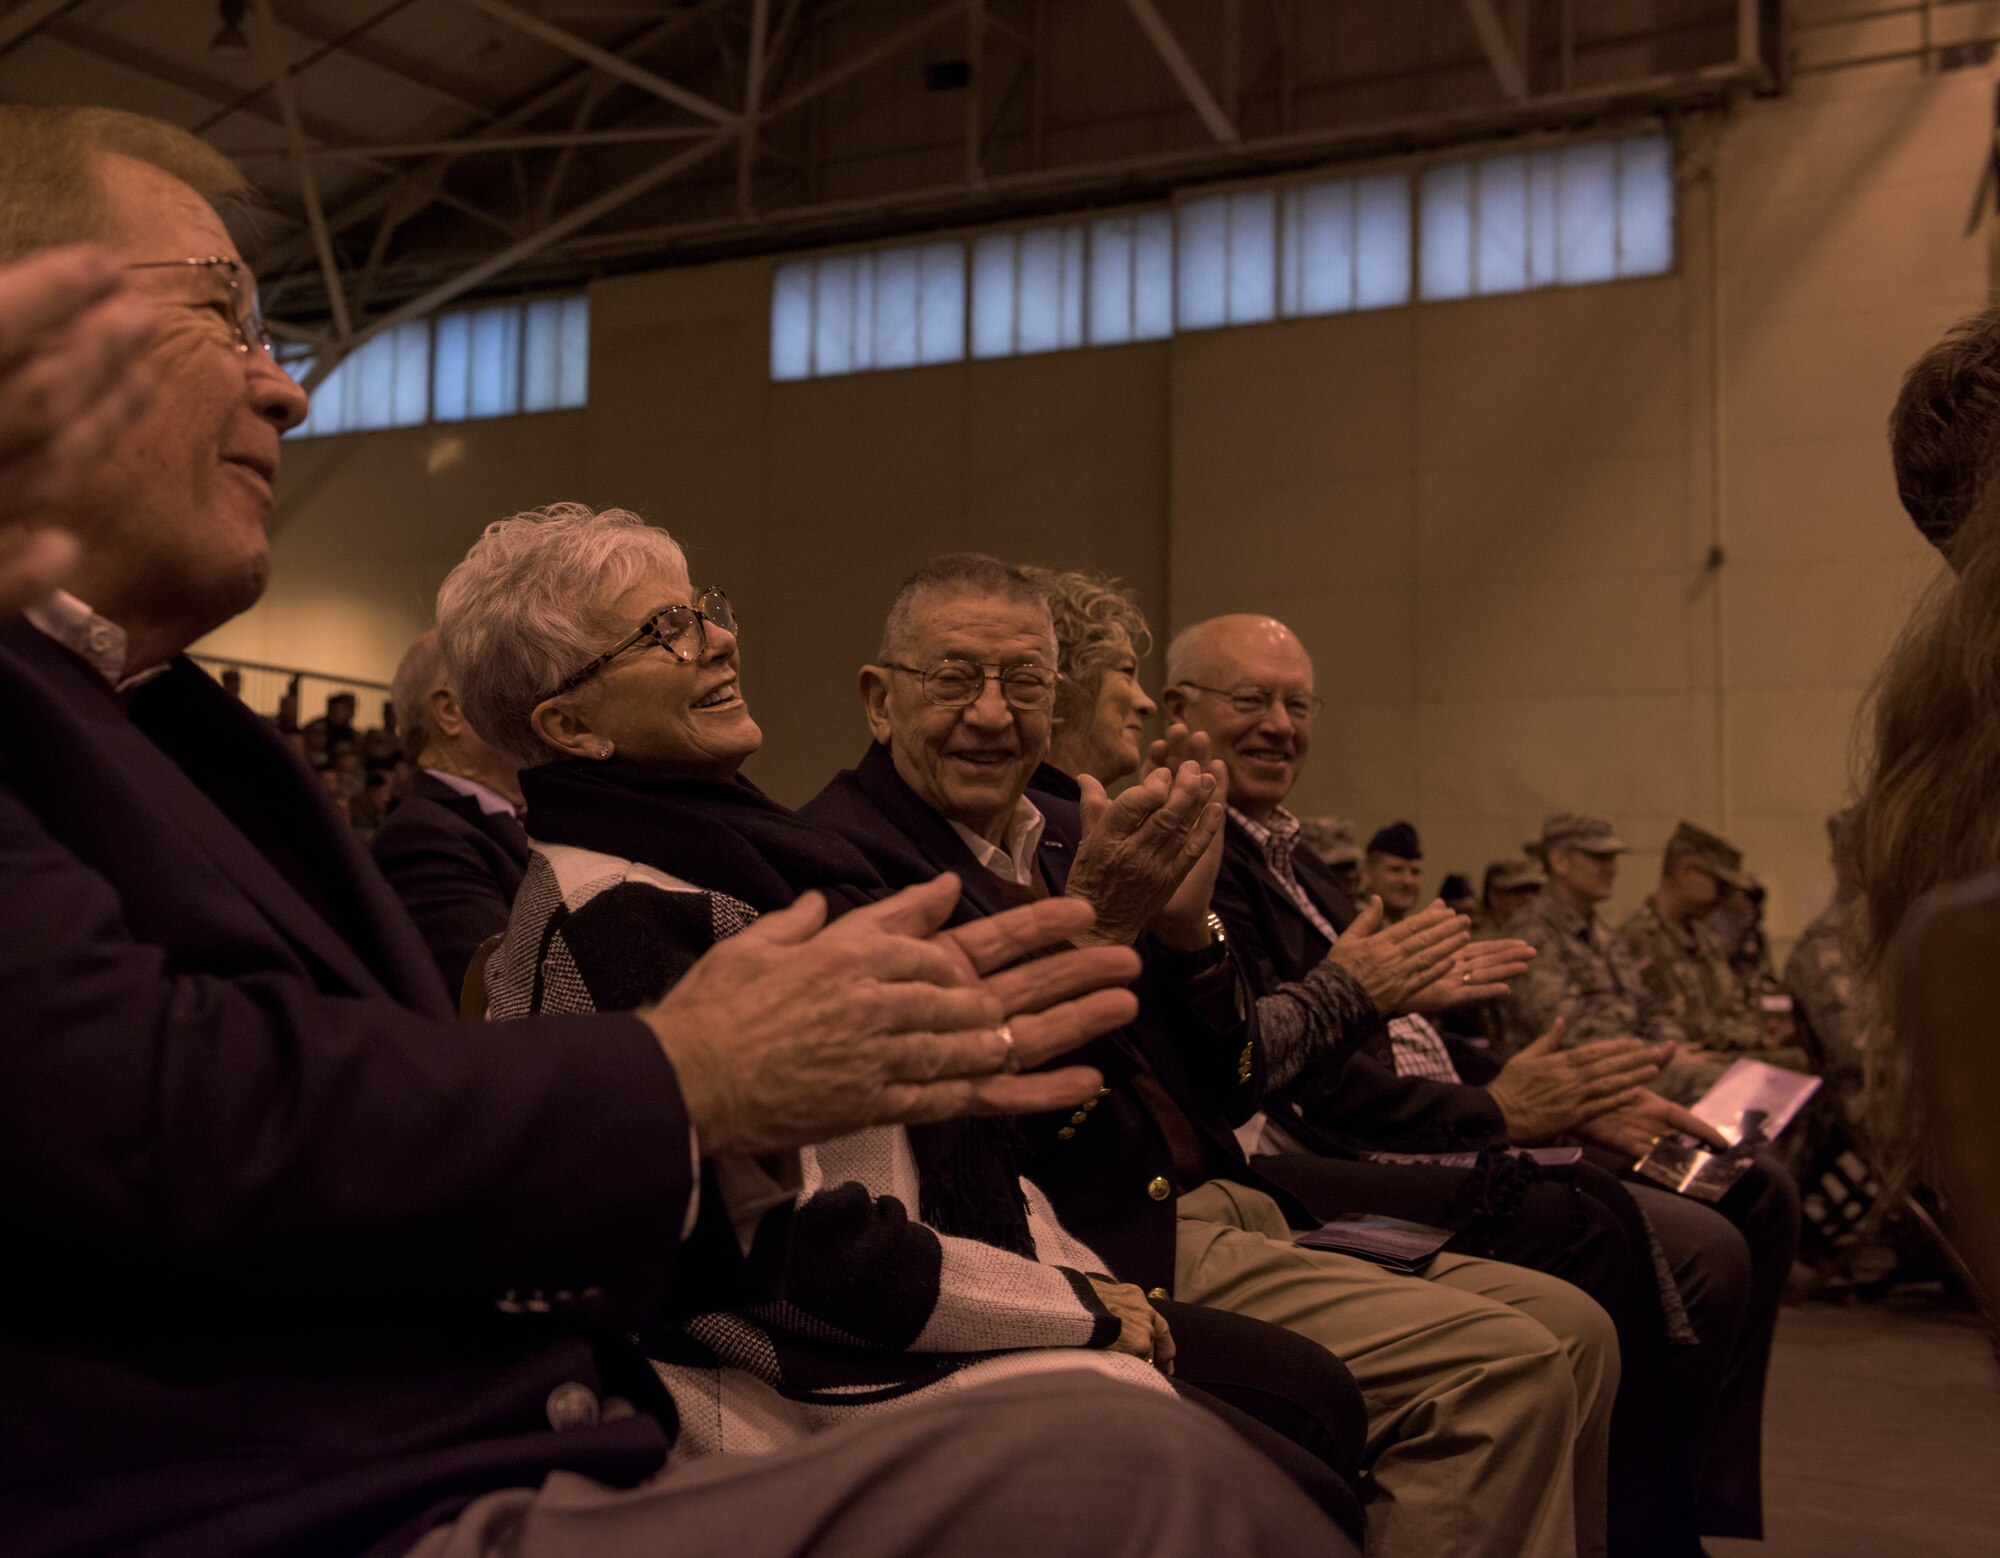 Retired Maj. Gen. Stanley Newman, former 137th Special Operations Wing commander, and retired Maj. Gen. Rita Aragon, Oklahoma Secretary of Veterans of Affairs, interact in the audience of the re-designation ceremony at the 137th Special Operations Wing at Will Rogers Air National Guard Base, Oklahoma City, Dec. 3, 2016. The ceremony marks the official transition of the Wing from its former air refueling mission to its current special operations mission, making the Wing the second Air National Guard wing to be a part of AFSOC and the only U.S. Air Force entity to fly and maintain the MC-12W. (U.S. Air National Guard photo by Tech. Sgt. Caroline Essex)